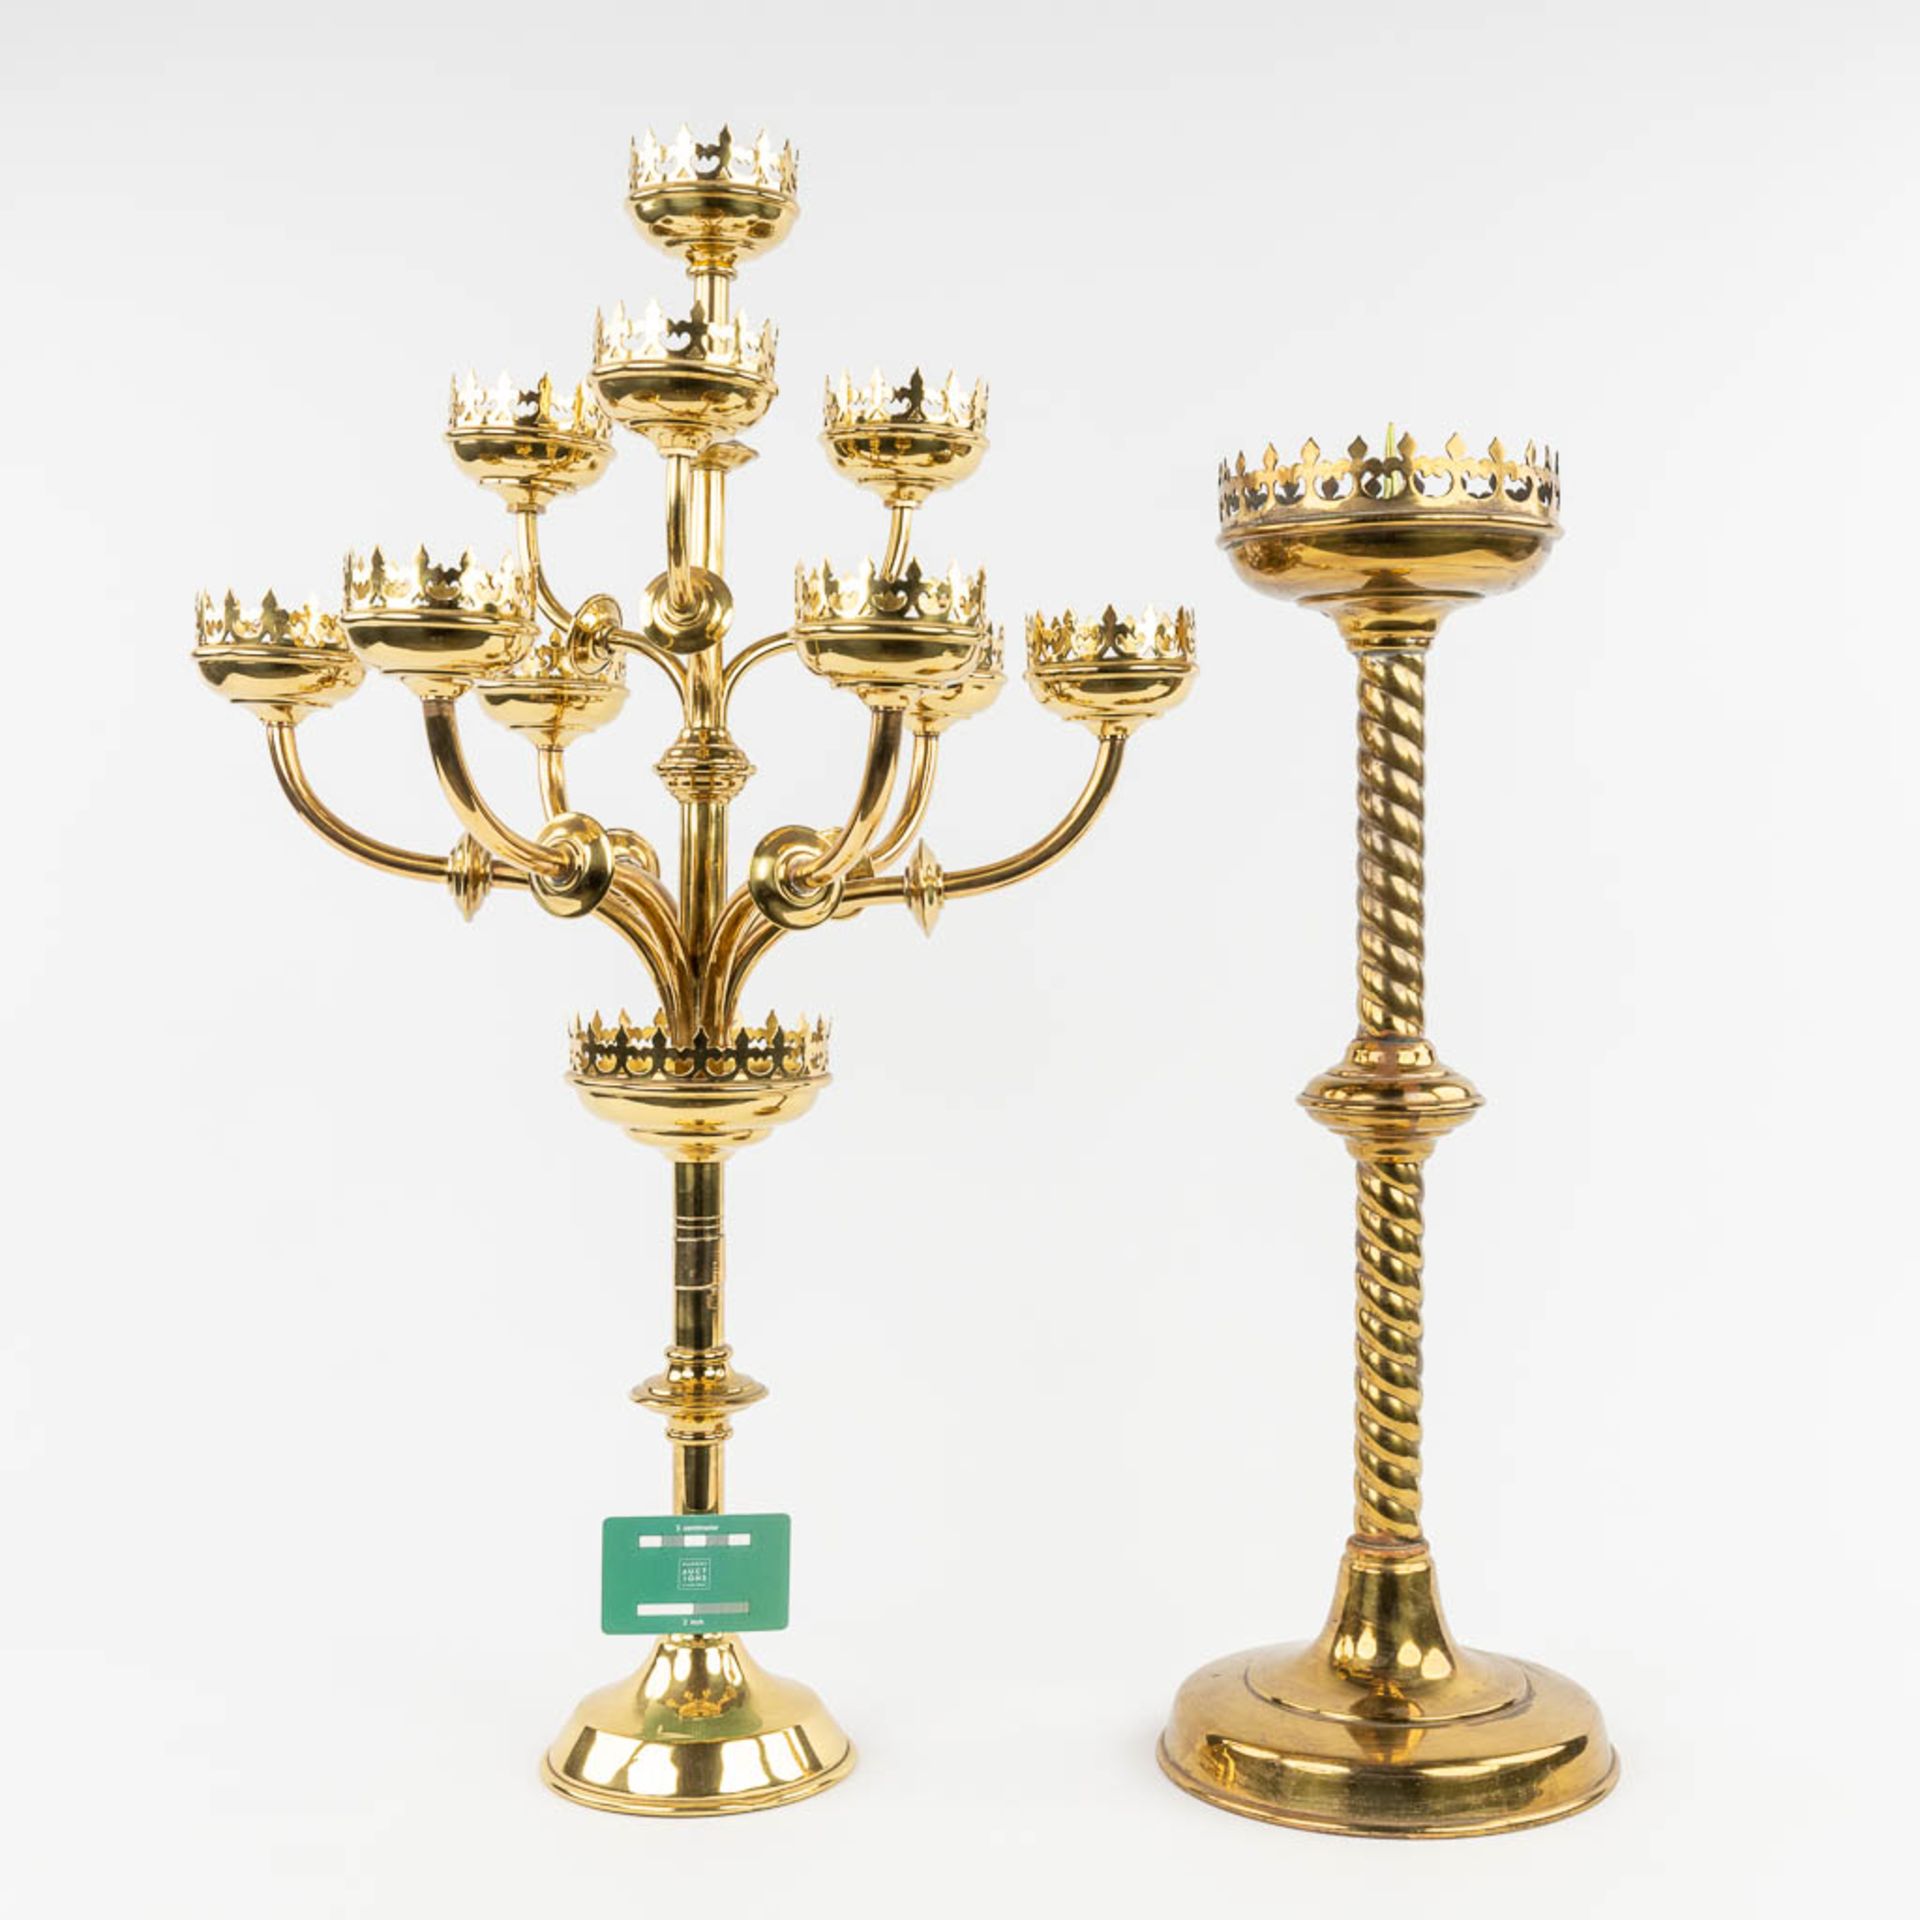 A candelabra with 10 points of light, gothic revival, added 1 candle holder. 20th C. (H:73 x D:45 cm - Image 2 of 17